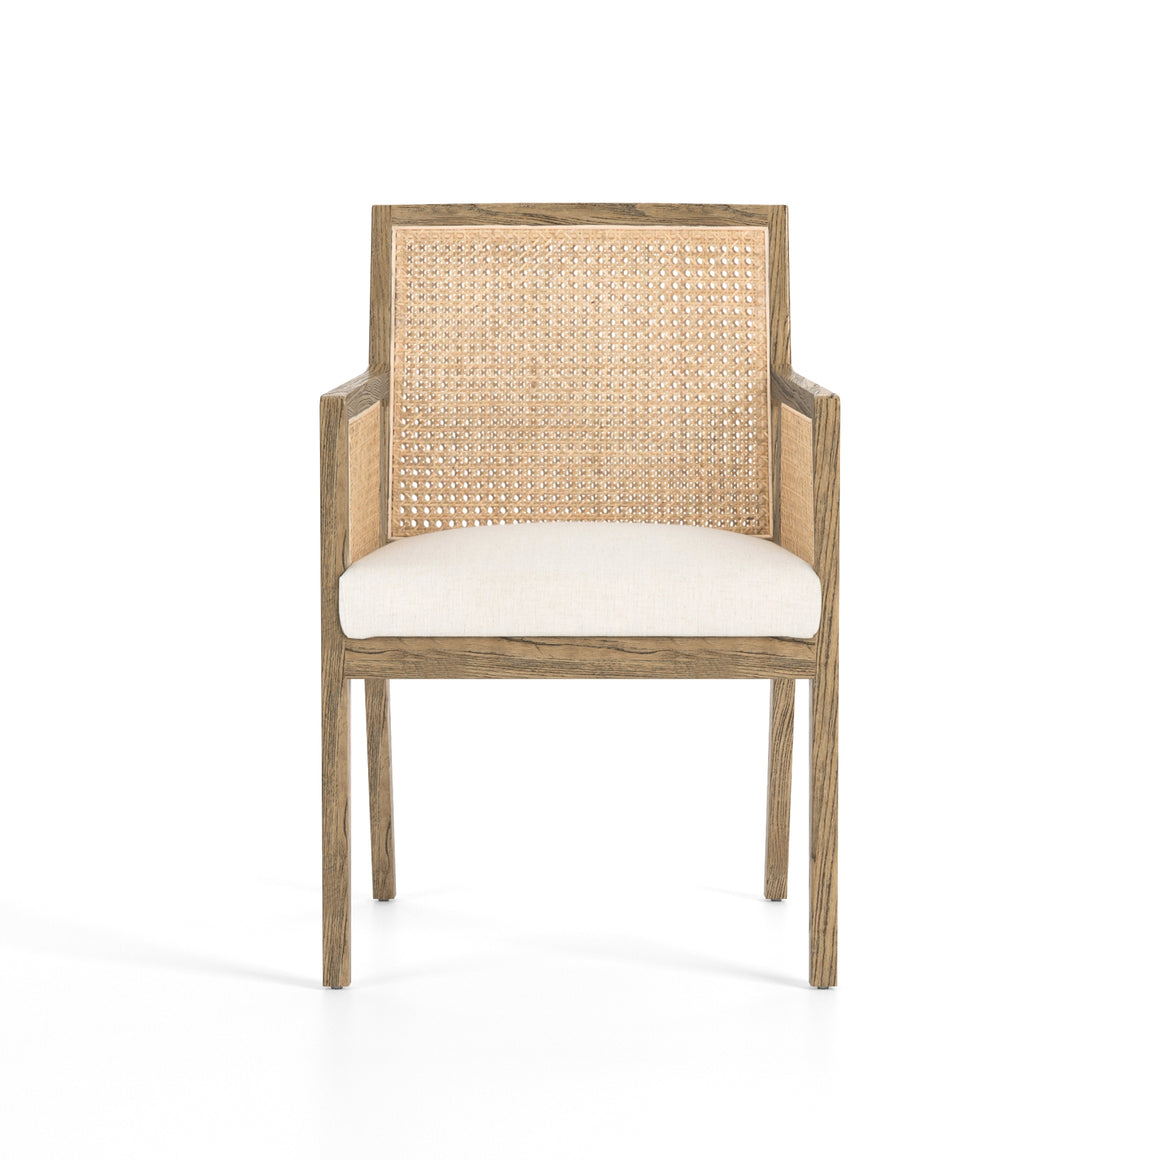 Antonia Cane Dining Arm Chair - Toasted Parawood